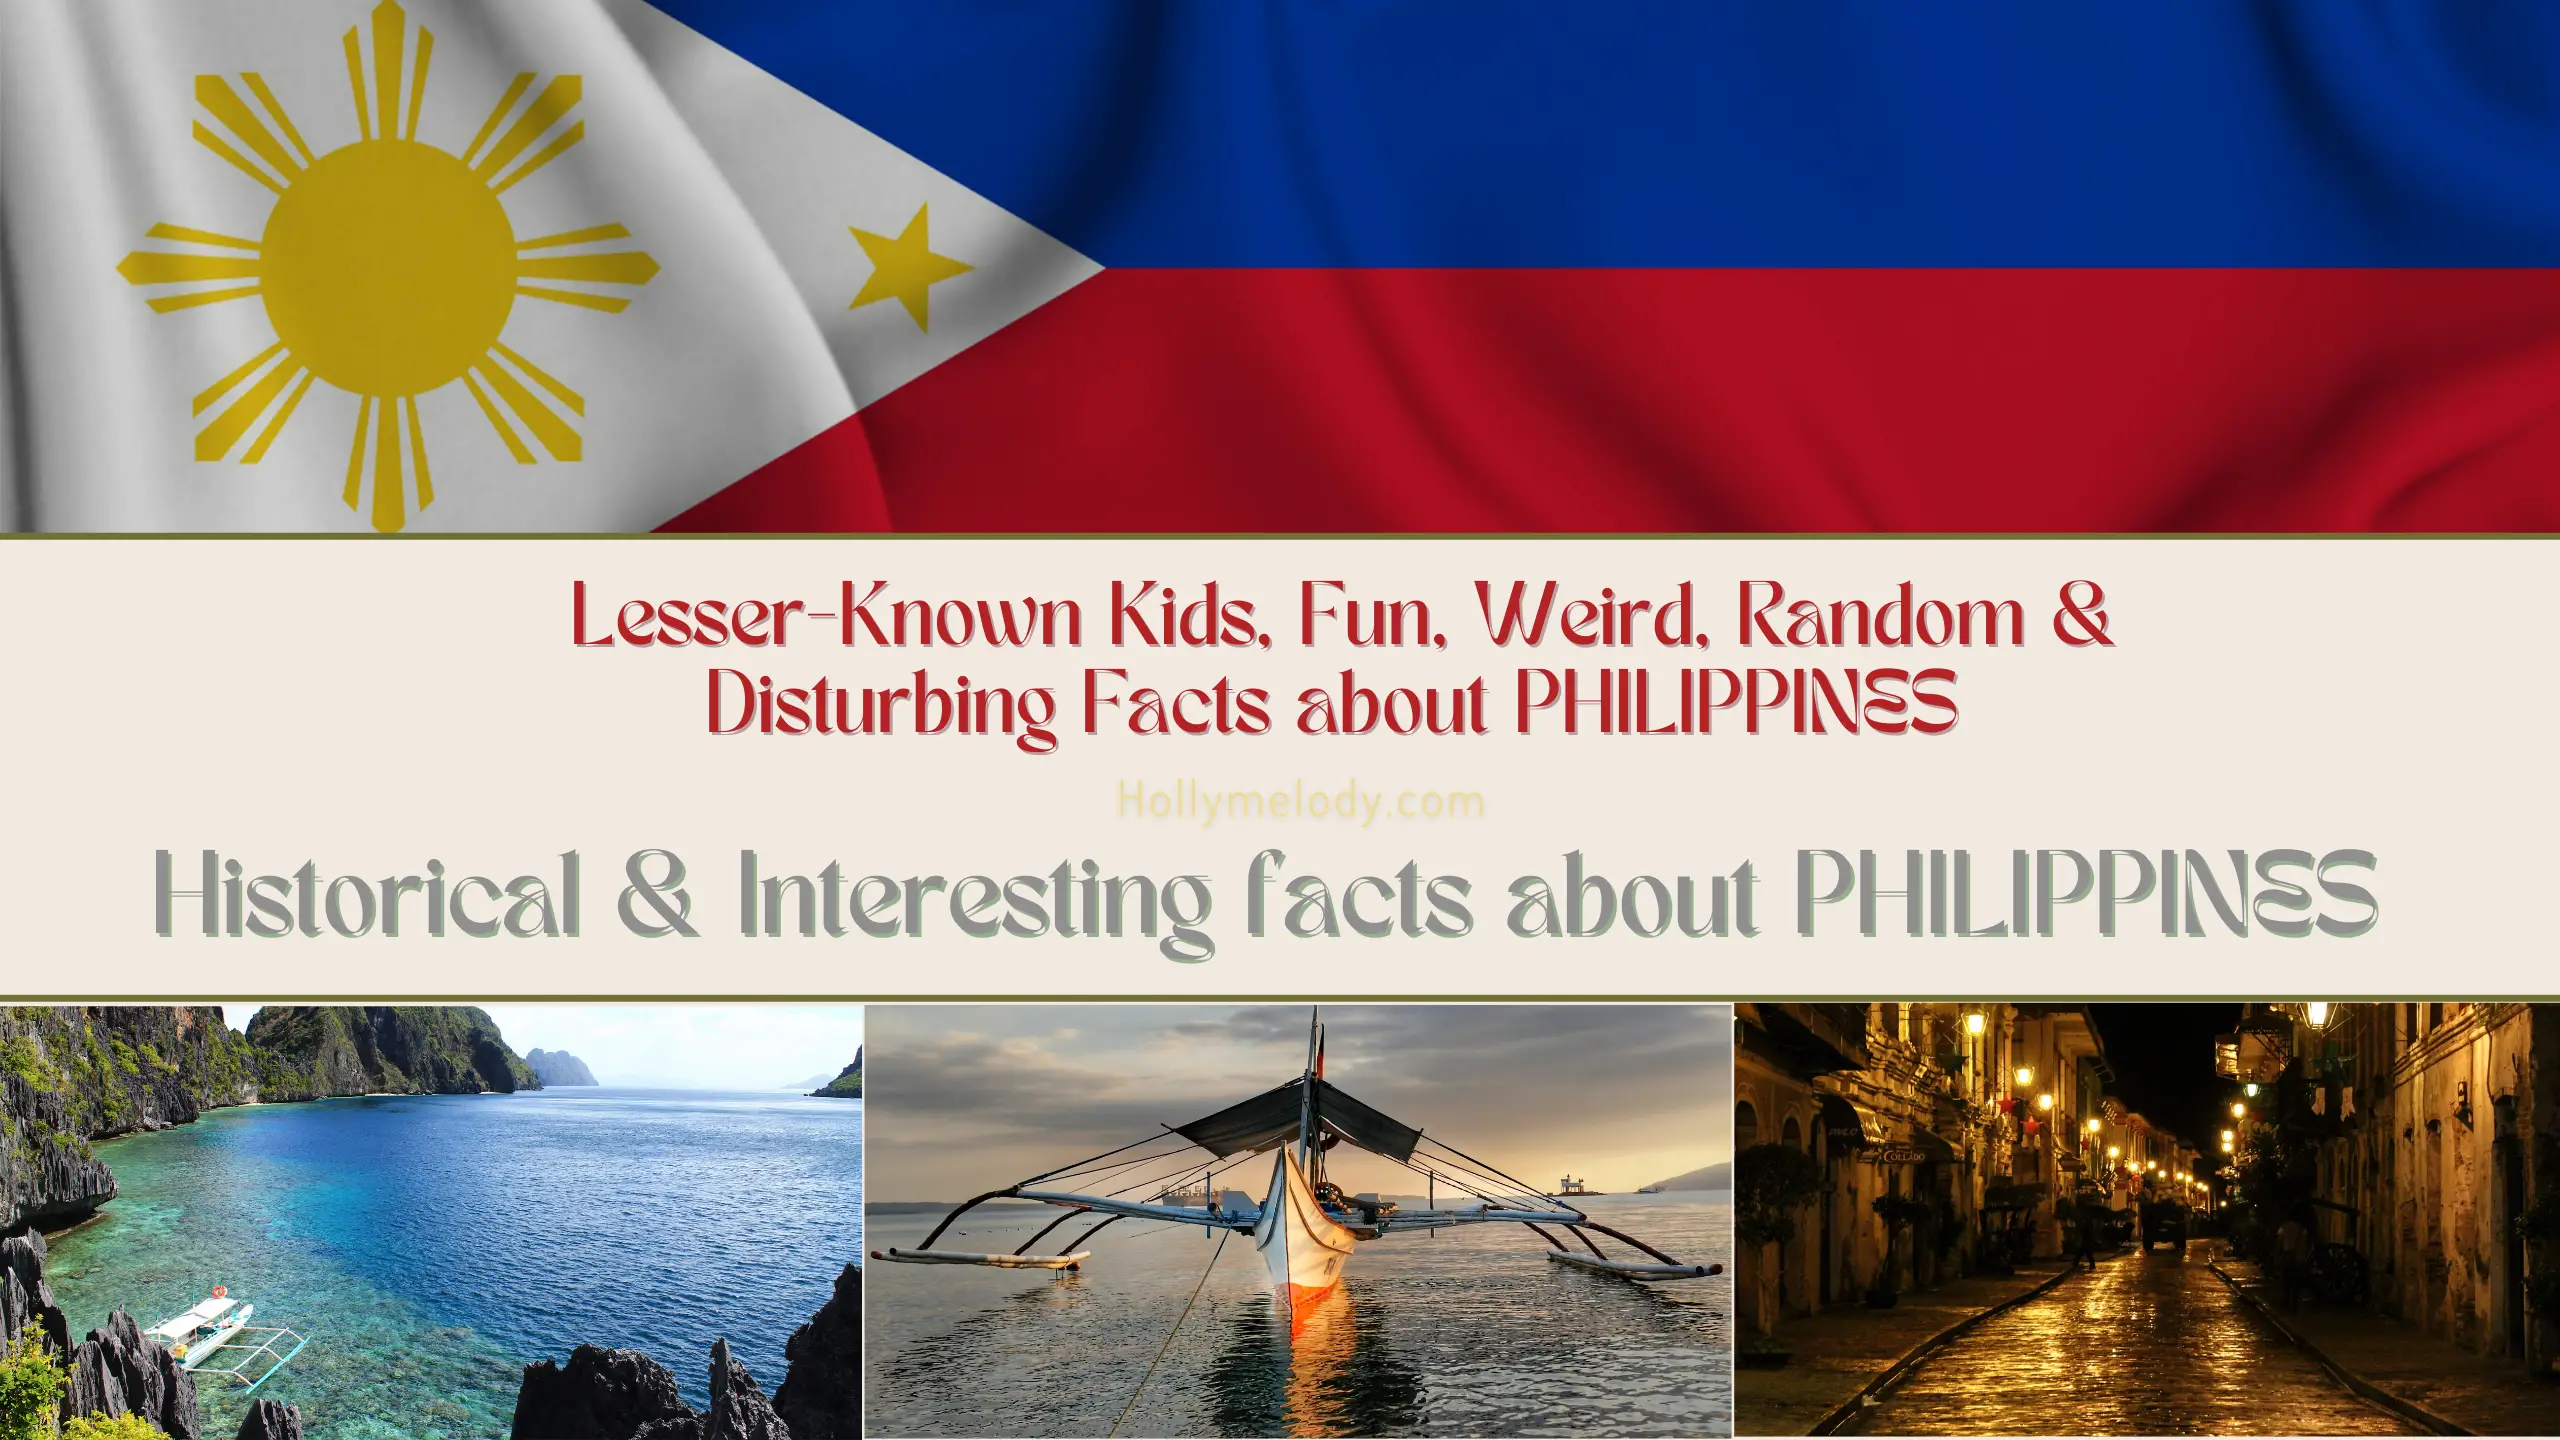 Facts about PHILIPPINES